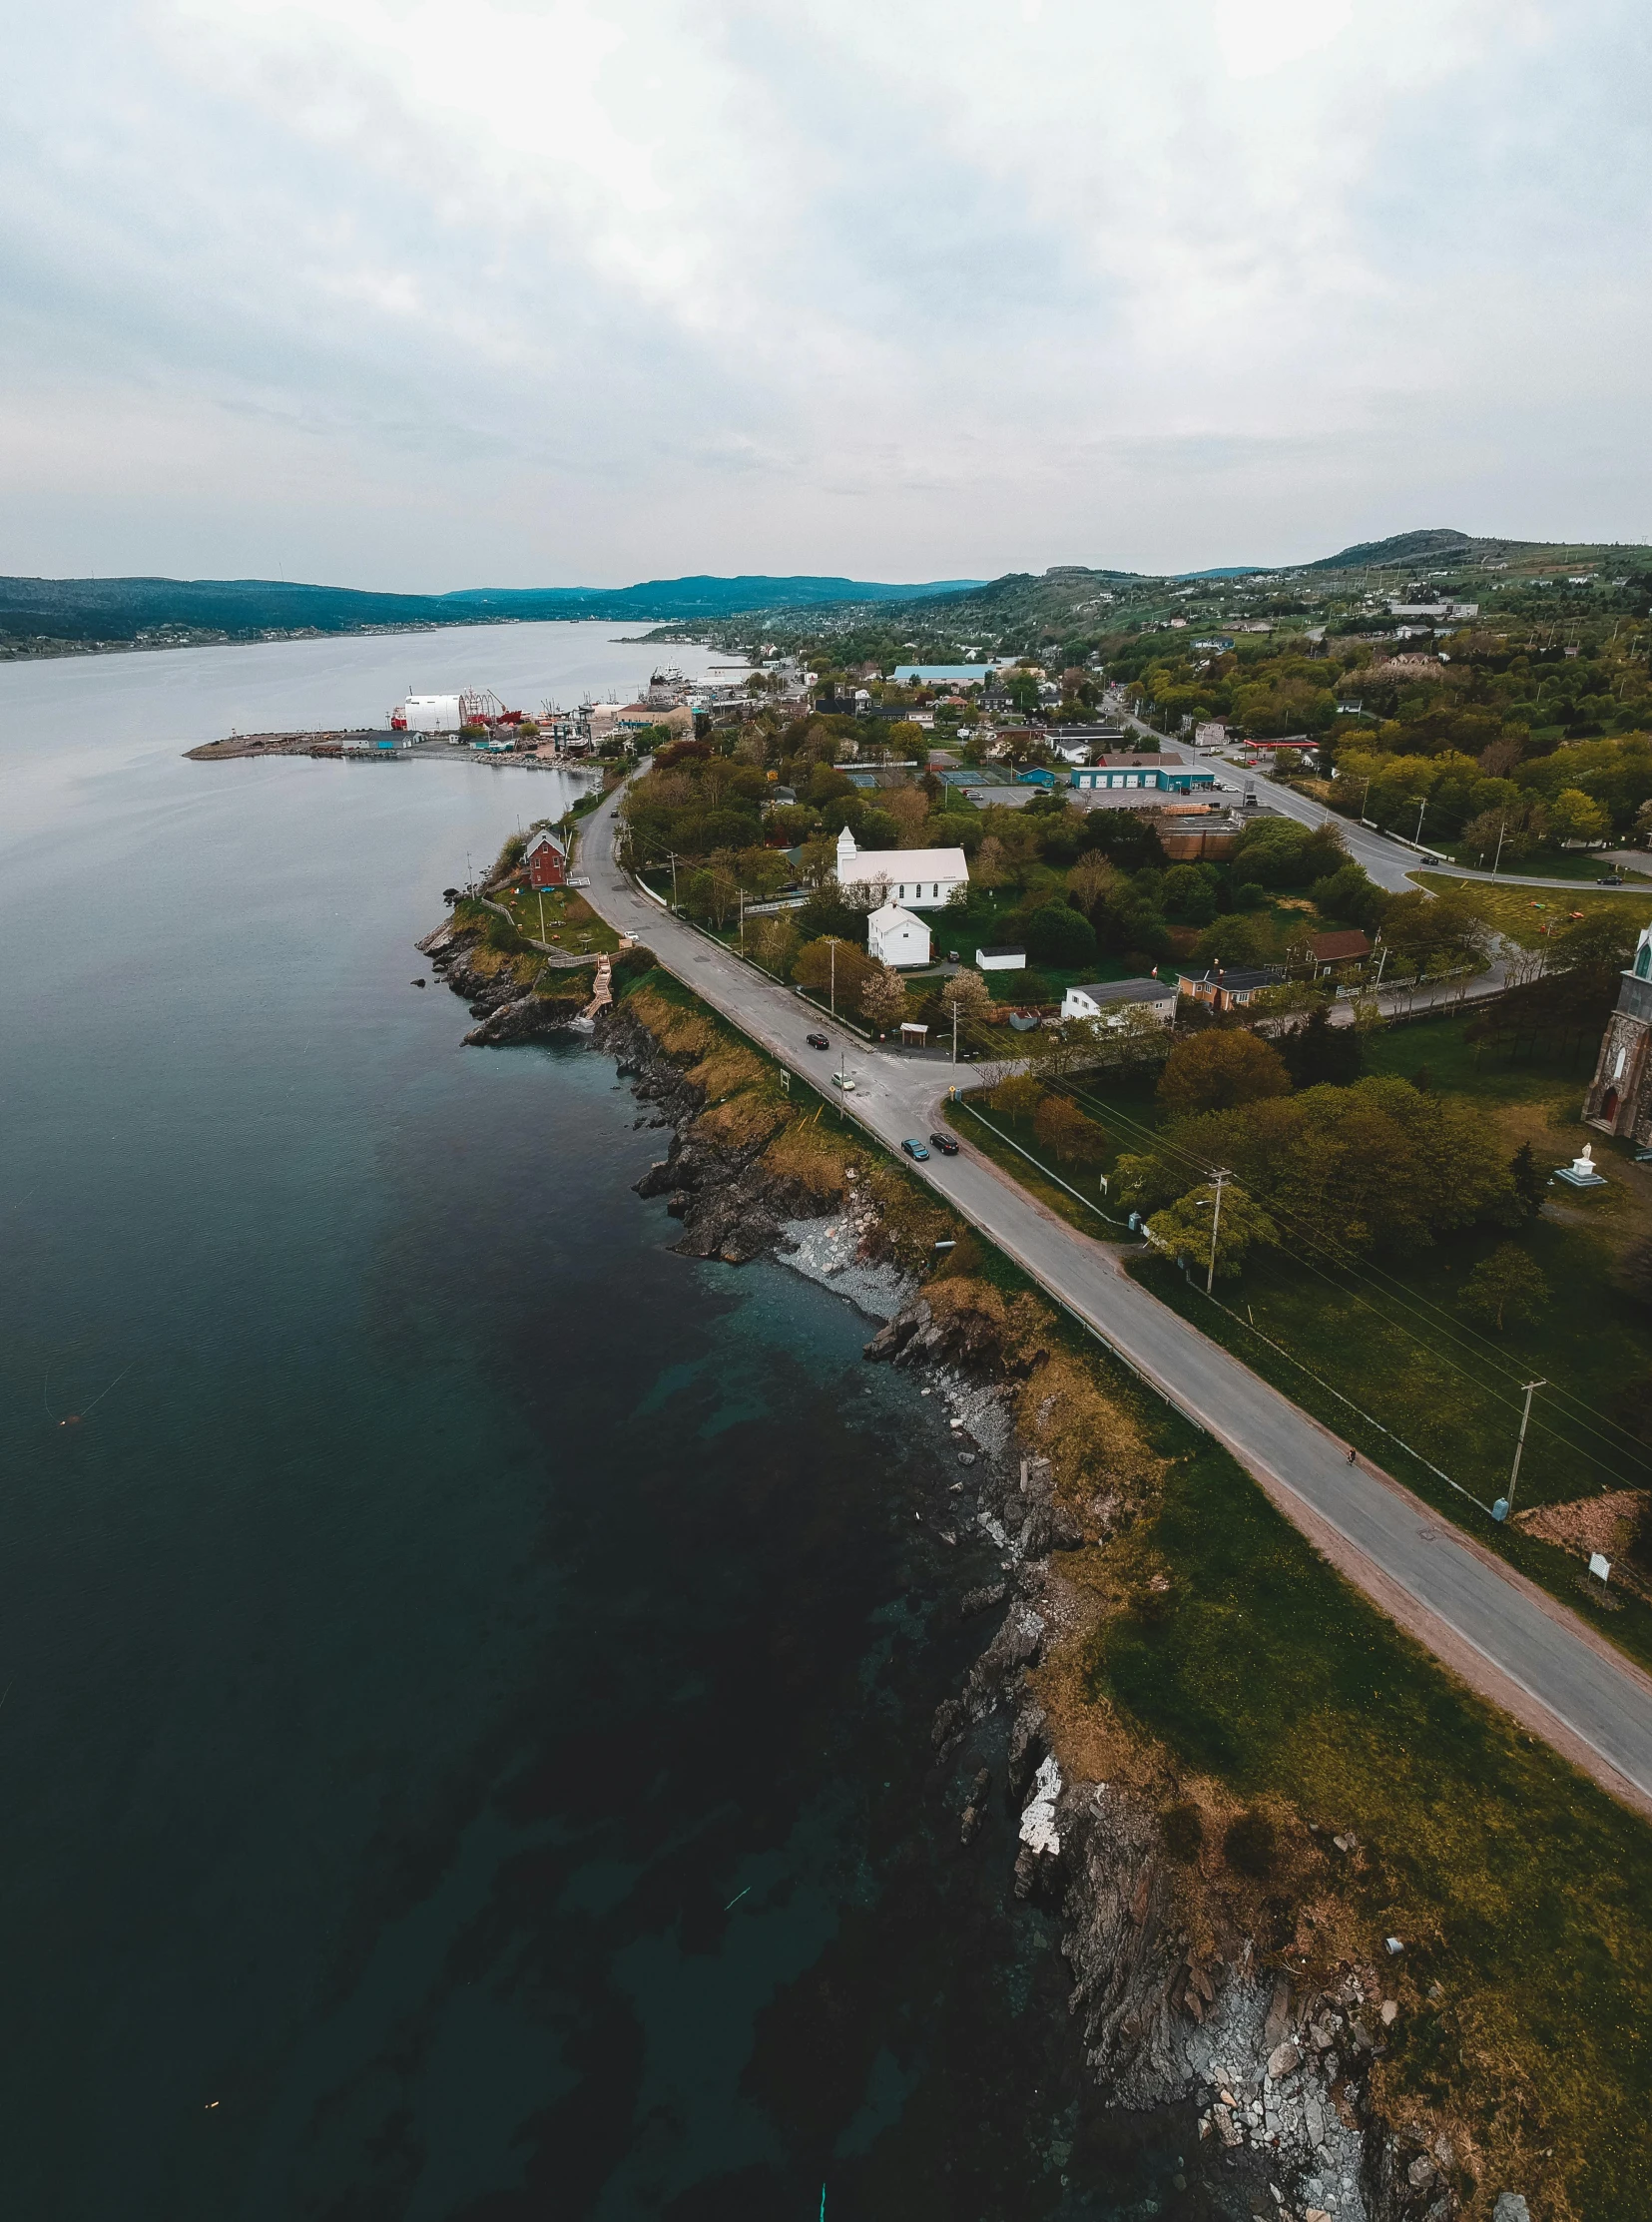 a road that is next to a body of water, a portrait, drone photo, in the foreground a small town, francois legault, 4k image”